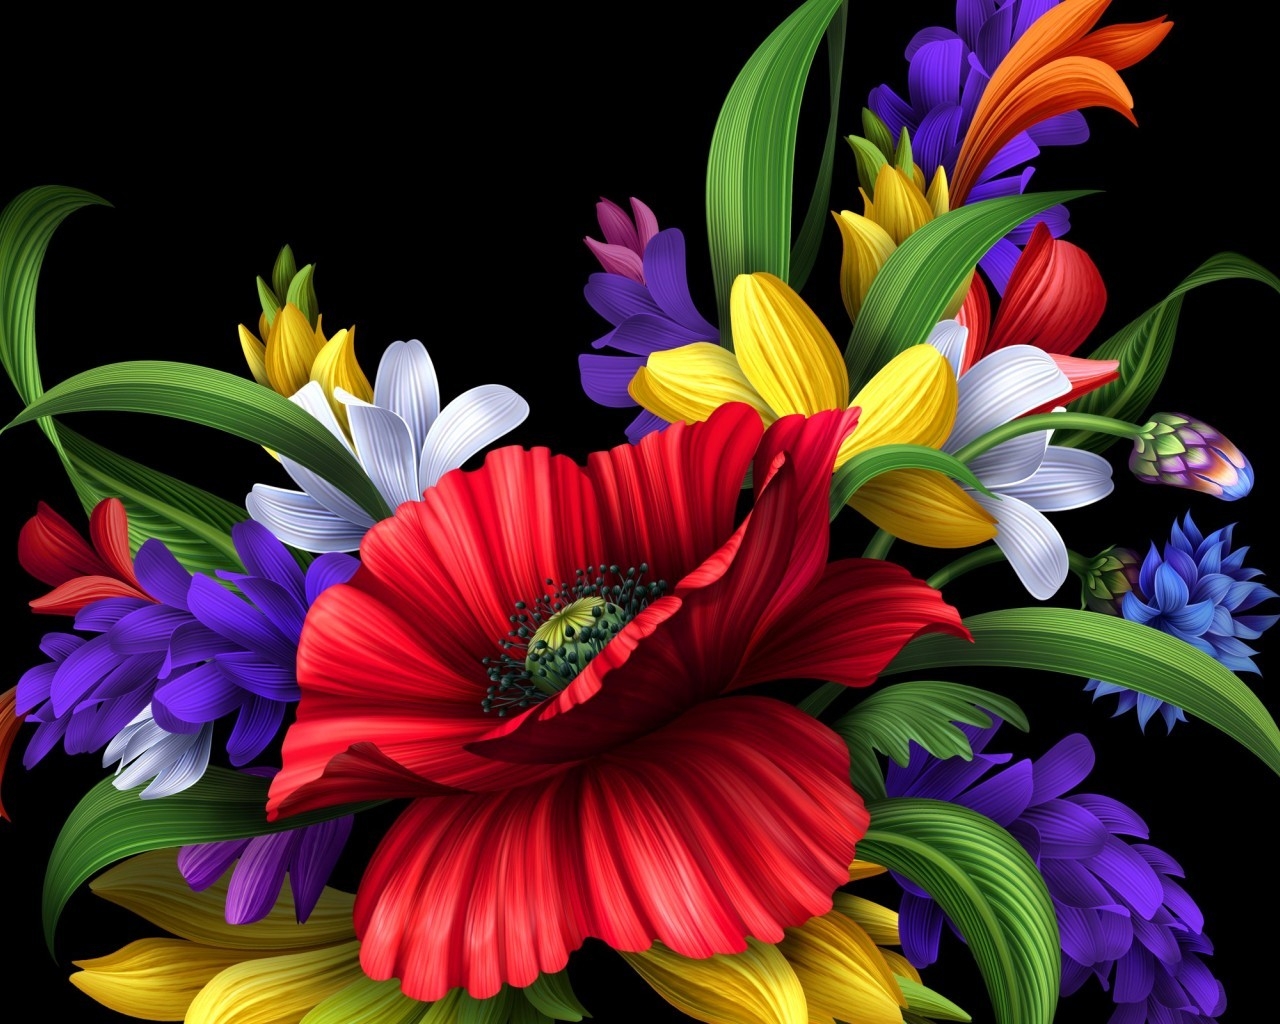 Special Flower Bouquet for 1280 x 1024 resolution